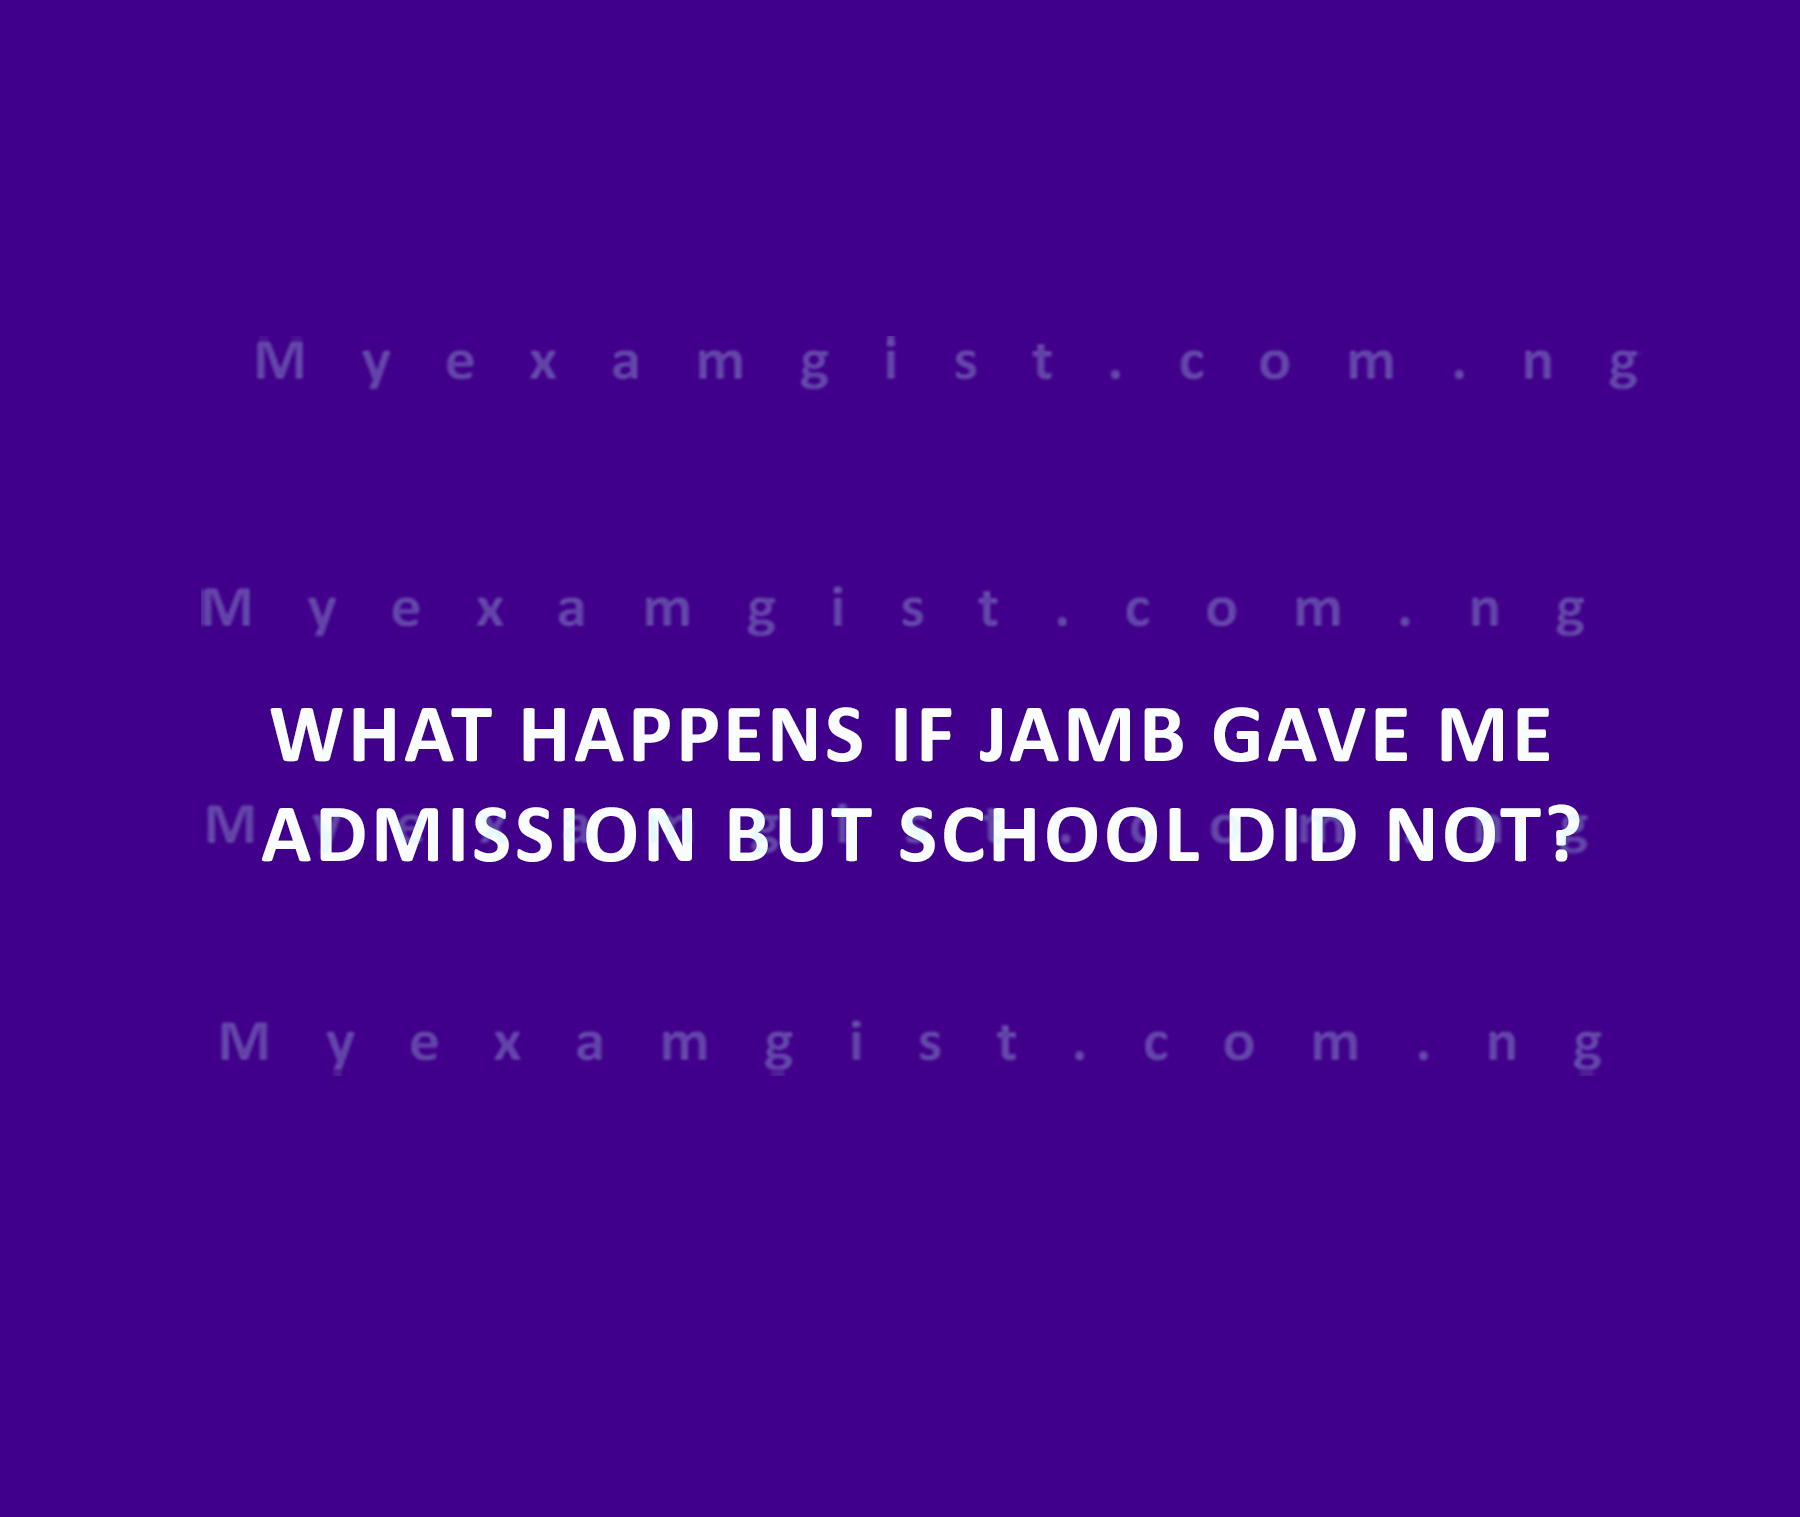 What happens if JAMB gave me admission but school did not?